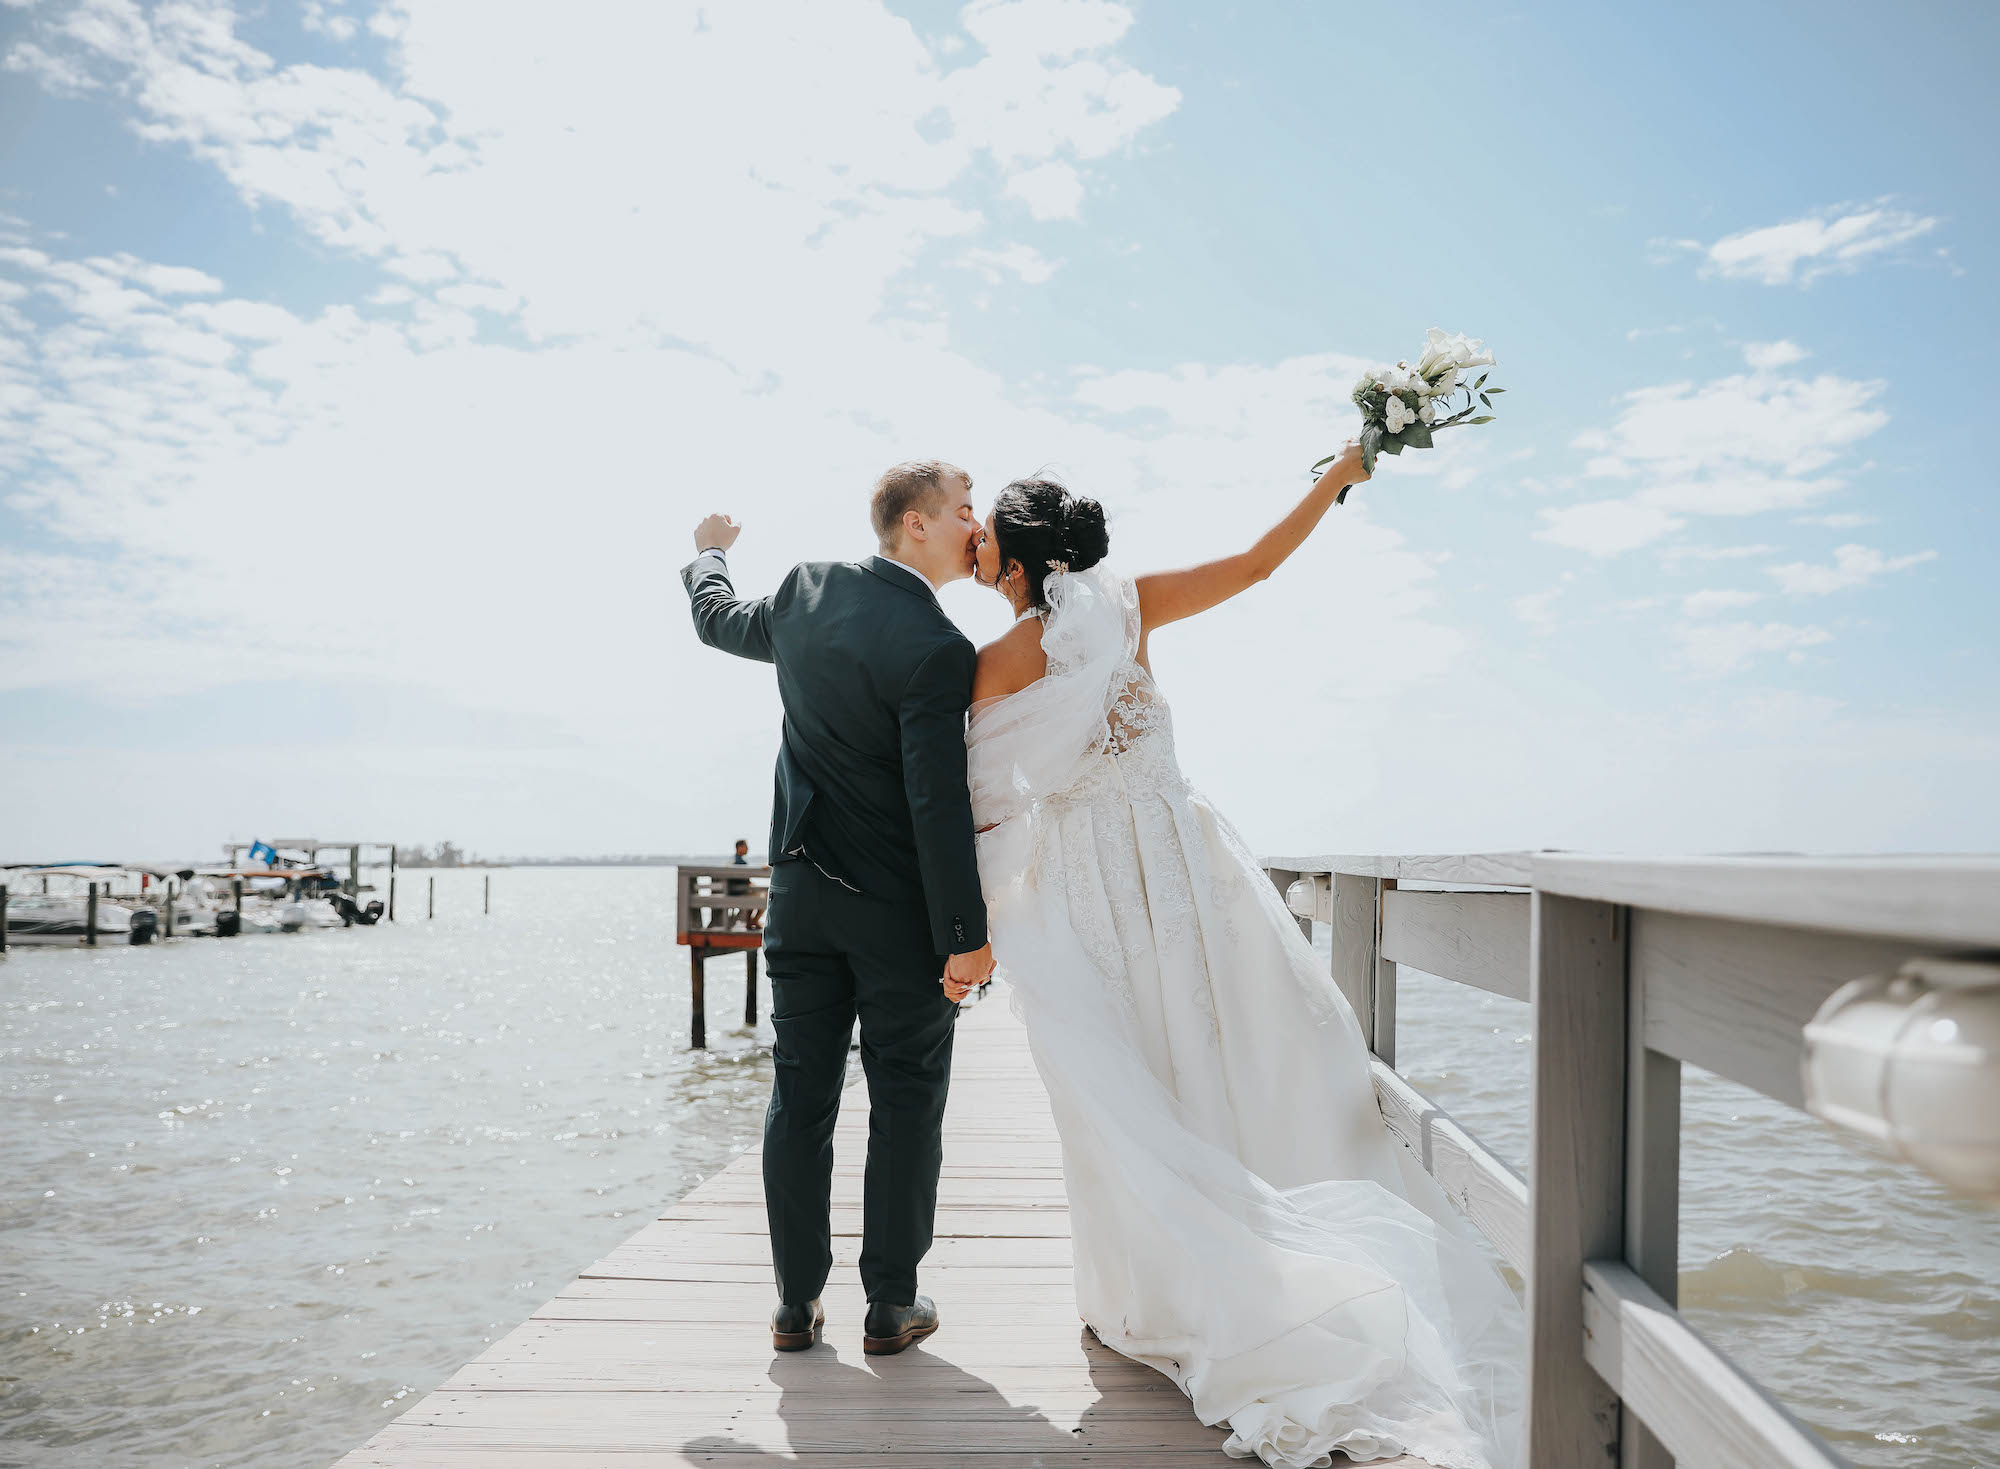 Florida Bride and Groom Kiss on Waterfront Private Pier in Dunedin, Holding Greenery Inspired Bridal Bouquet with White Flowers | Tampa Bay Wedding Florist Brides N Blooms | Clearwater Wedding Venue Beso Del Sol Resort